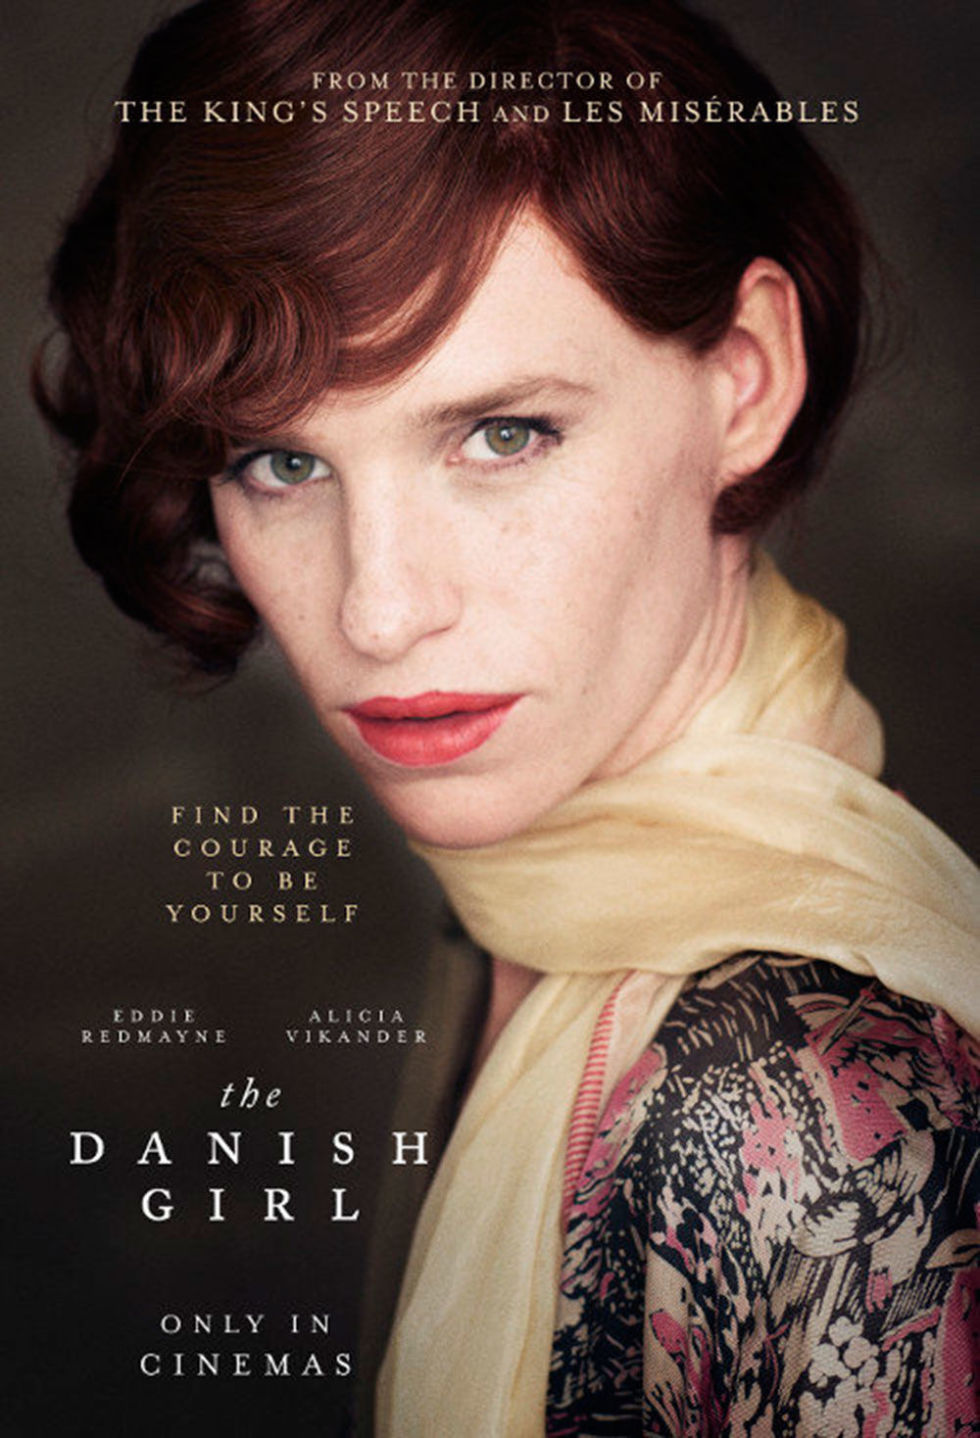 An Honest Review Of The Danish Girl Film Review Conversations About Her